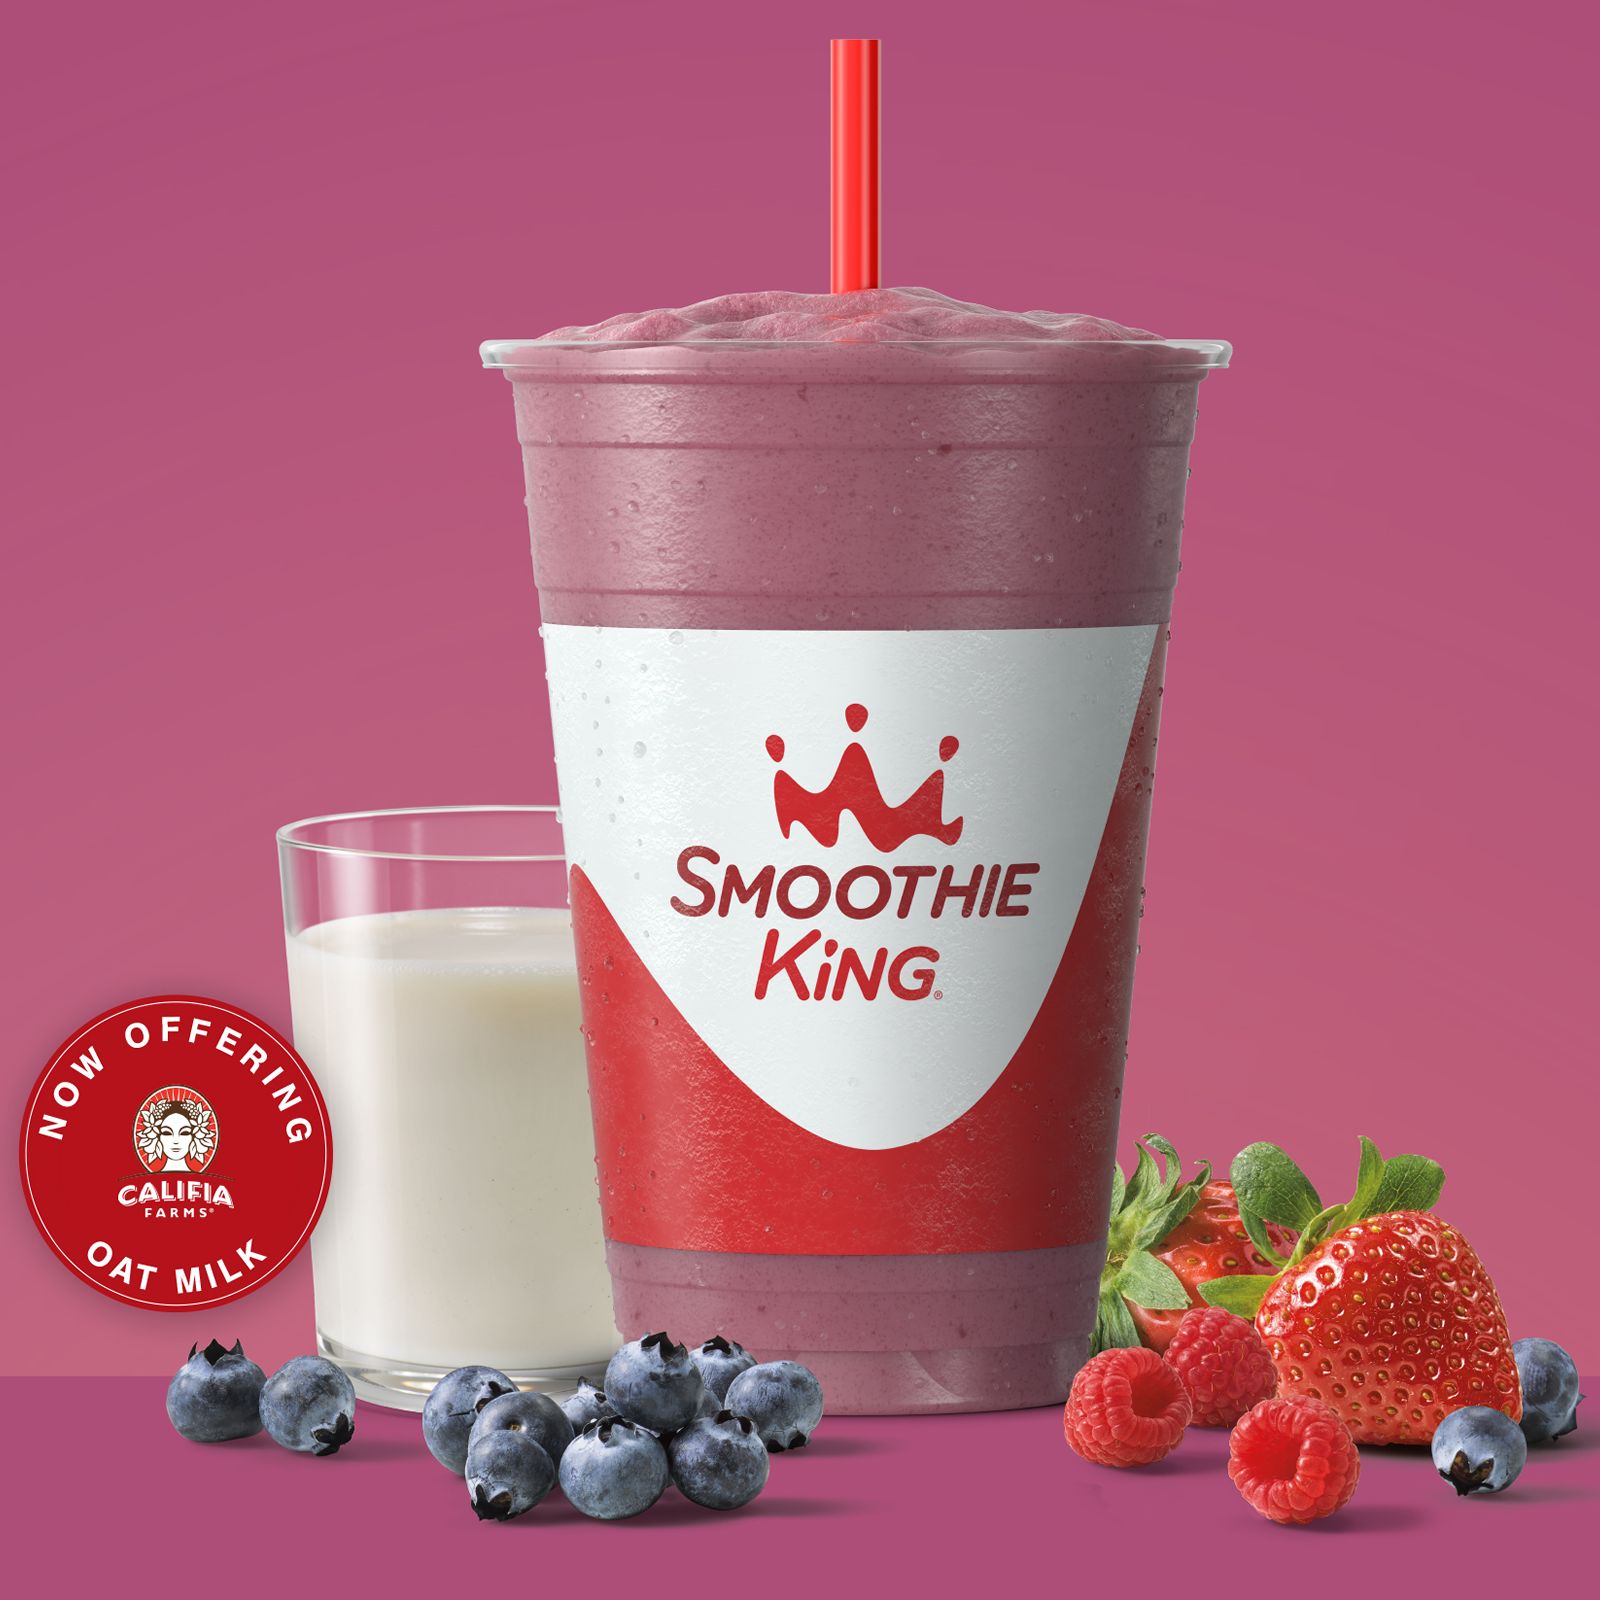 Smoothie King Adds New PlantBased Blend to Help Support Living a Vegan